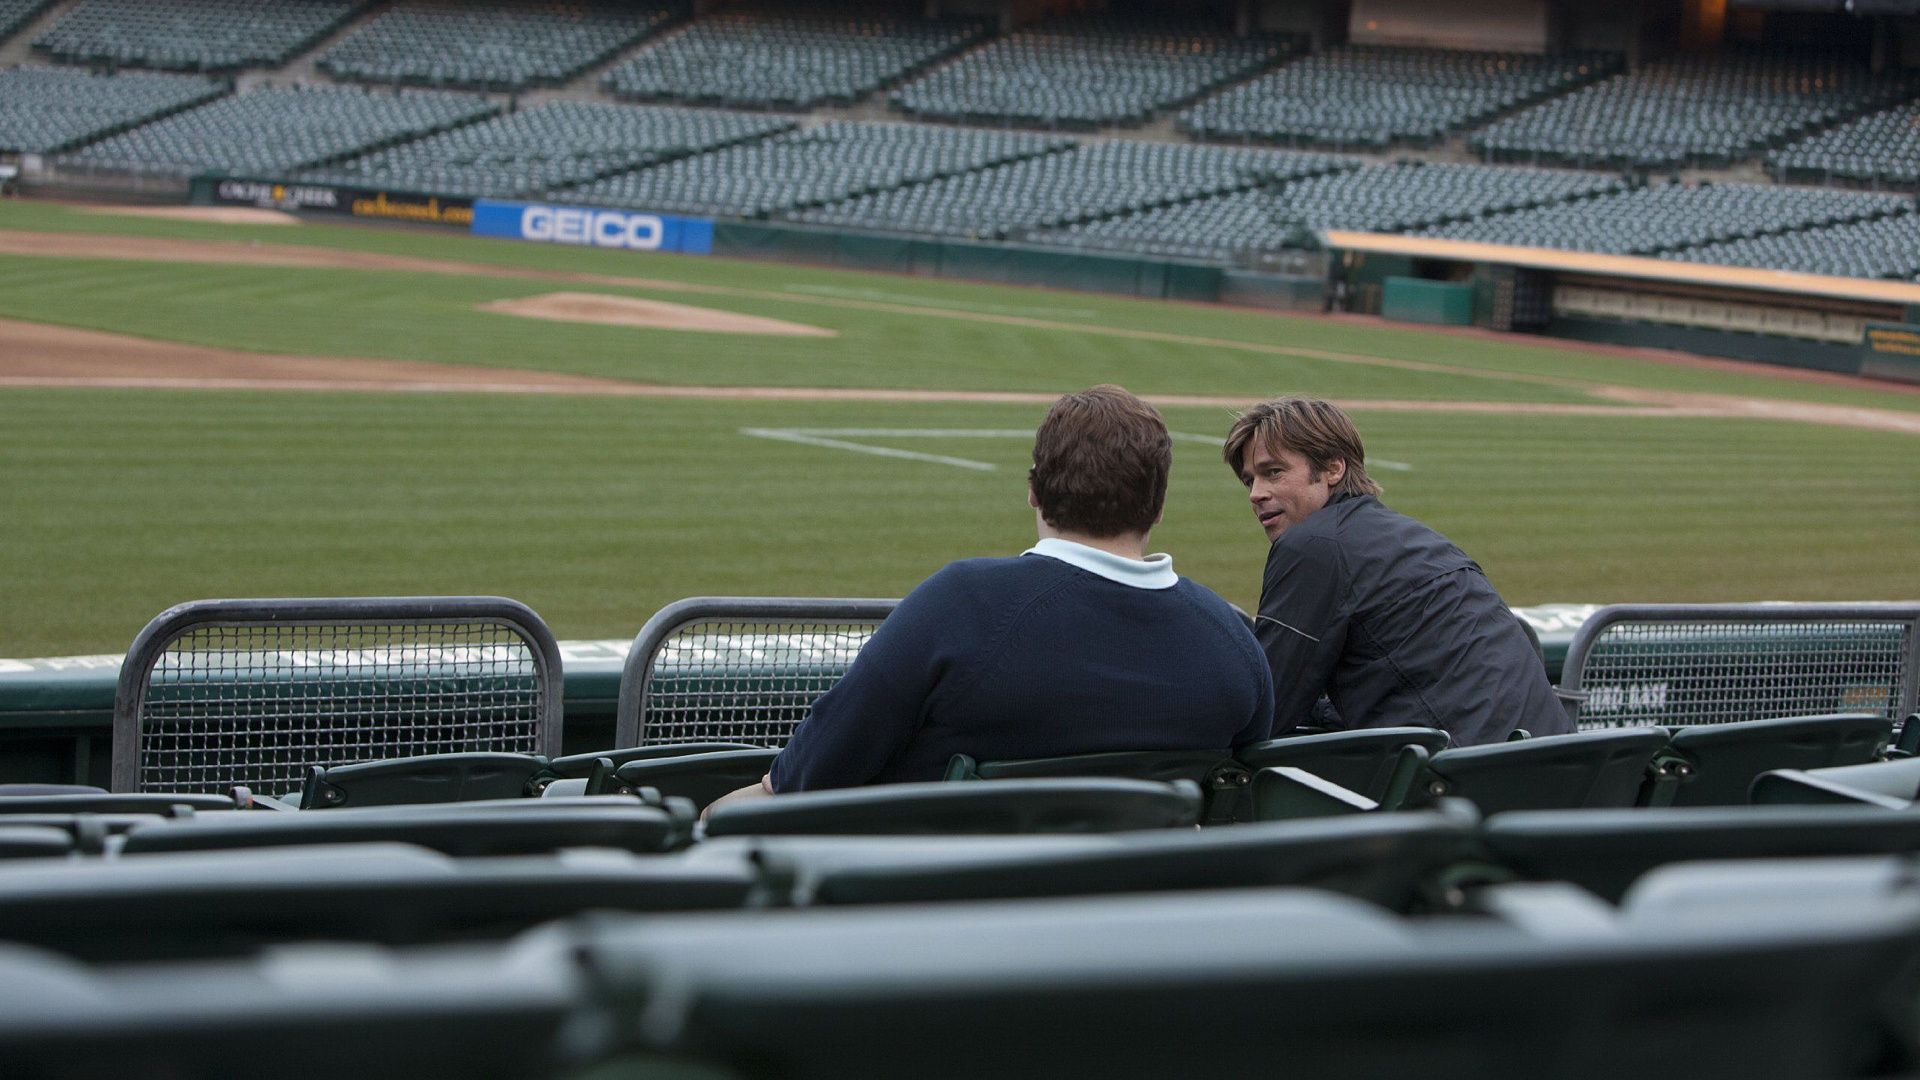 Moneyball: Filming began in July 2010 at various stadiums such as Dodger Stadium and Oakland Coliseum. 1920x1080 Full HD Wallpaper.